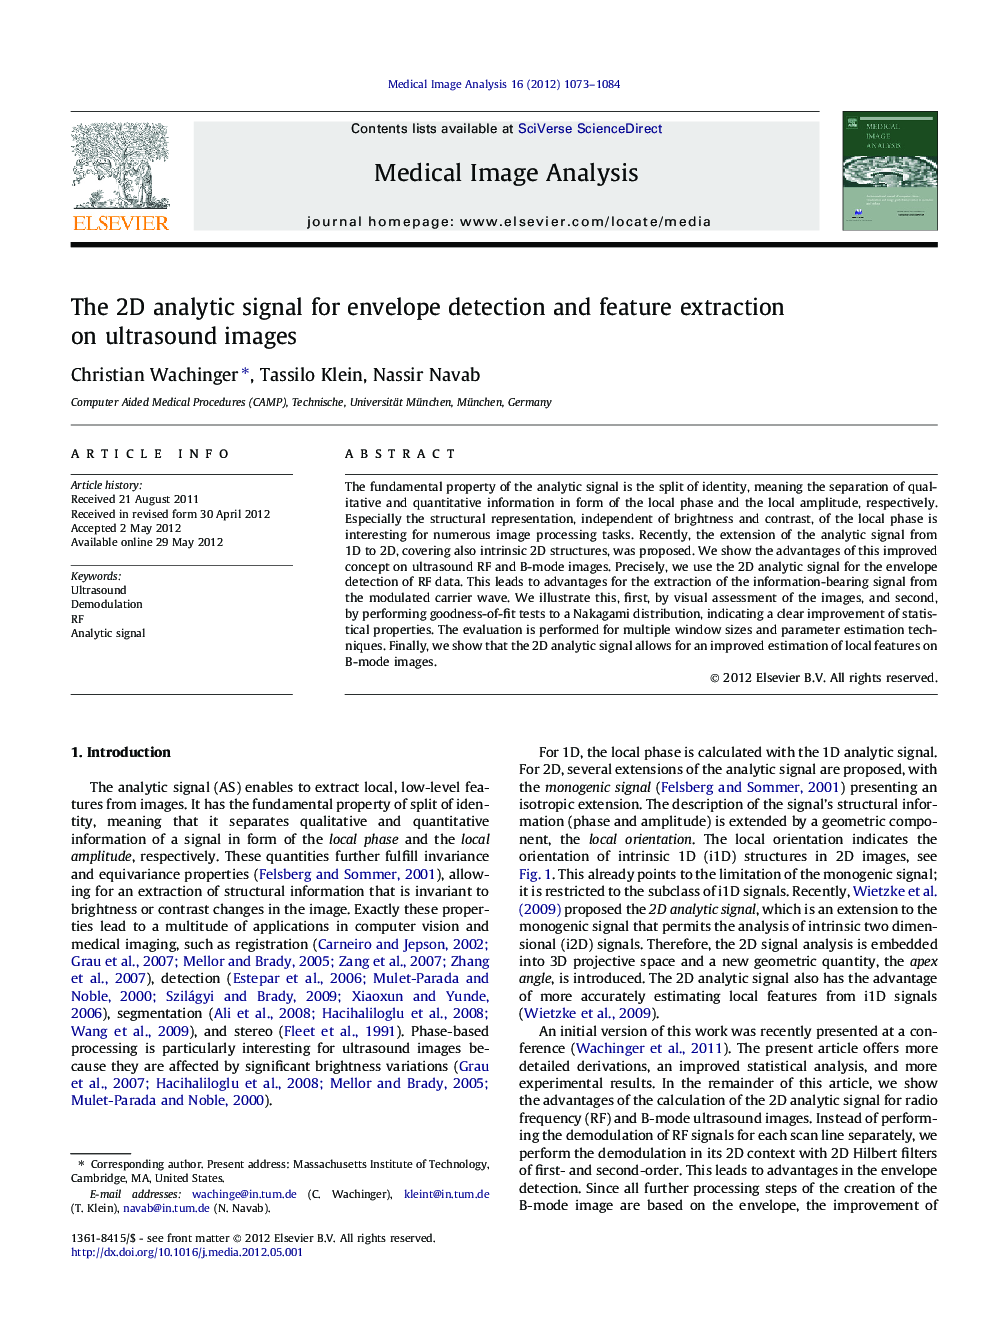 The 2D analytic signal for envelope detection and feature extraction on ultrasound images